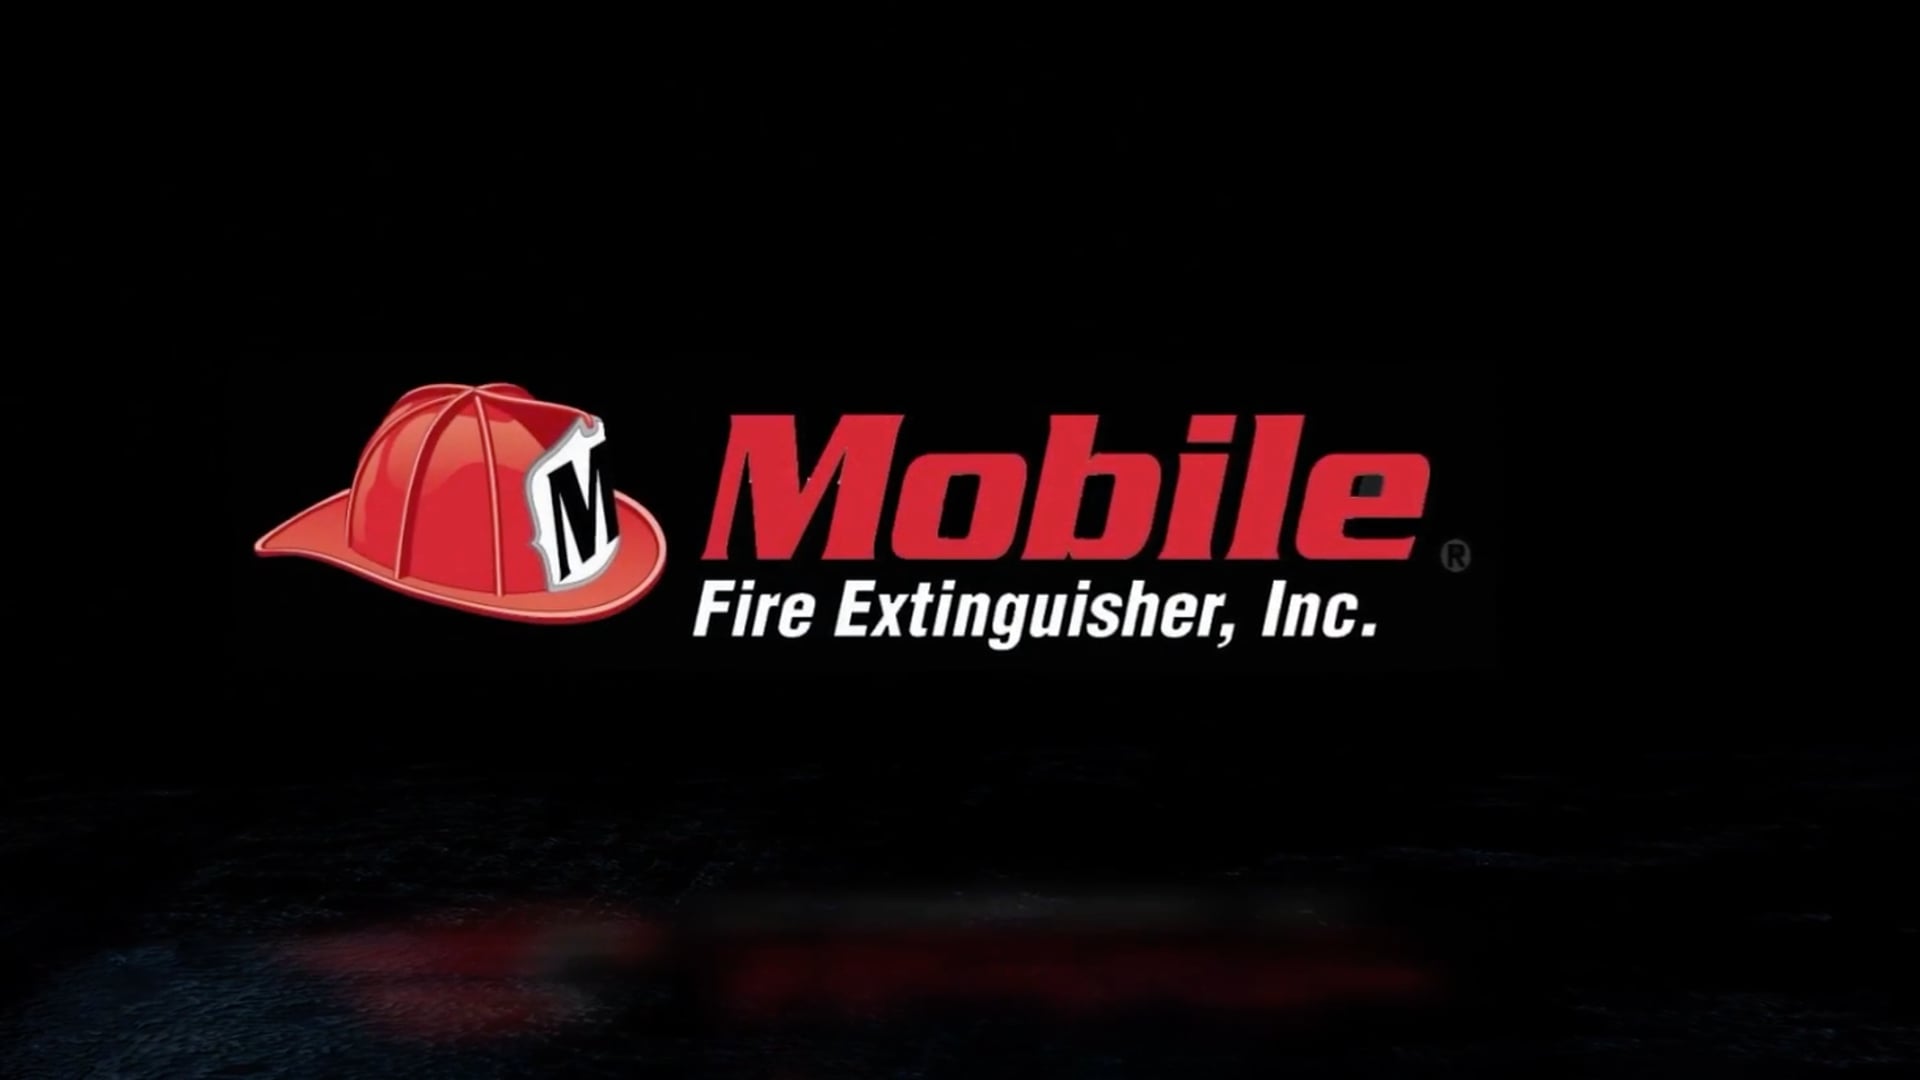 We Are Mobile Fire Extinguisher, Inc.